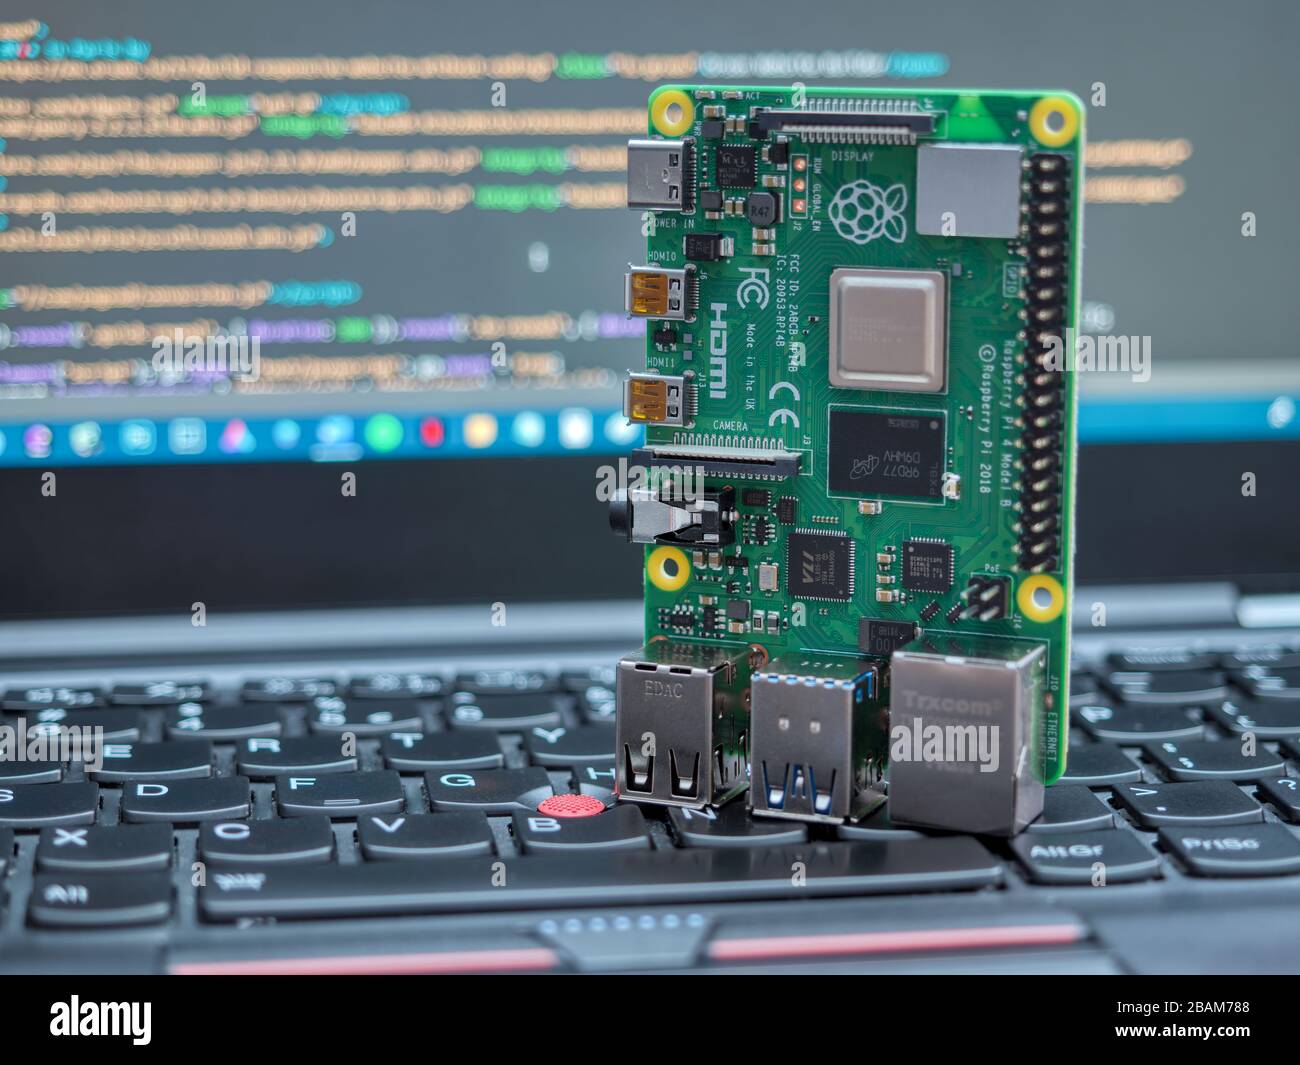 Galati, ROMANIA - March 22, 2020: Close-up of a Raspberry Pi 4 Model-B on a laptop keyboard. The Raspberry Pi is a credit-card-sized single-board comp Stock Photo